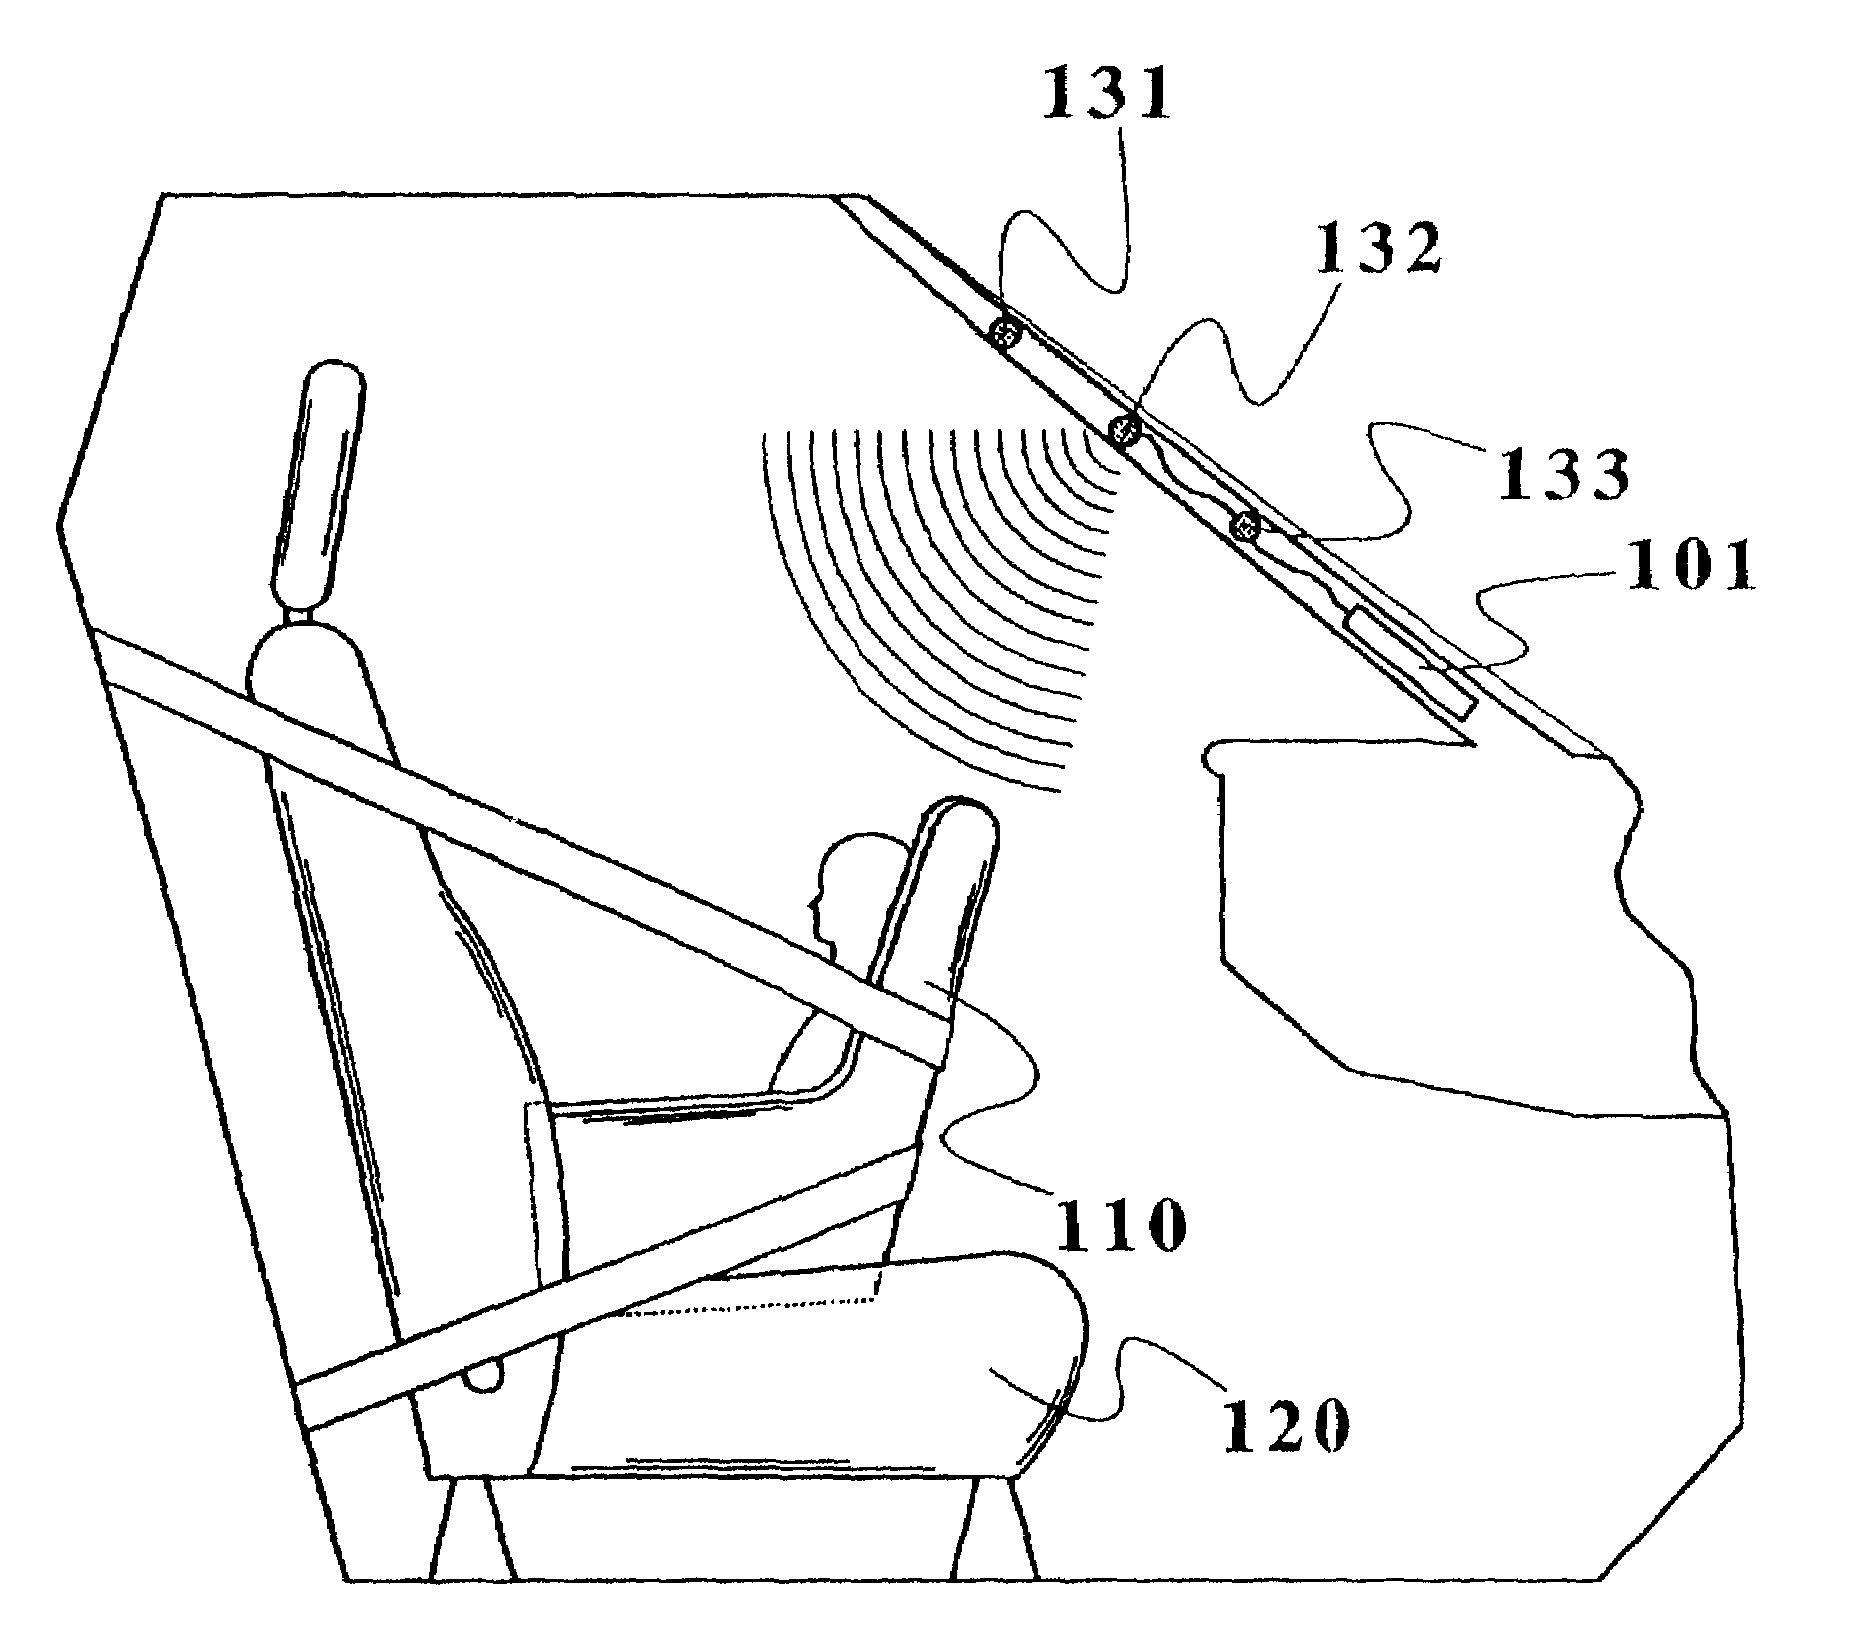 Vehicular occupant characteristic determination system and method